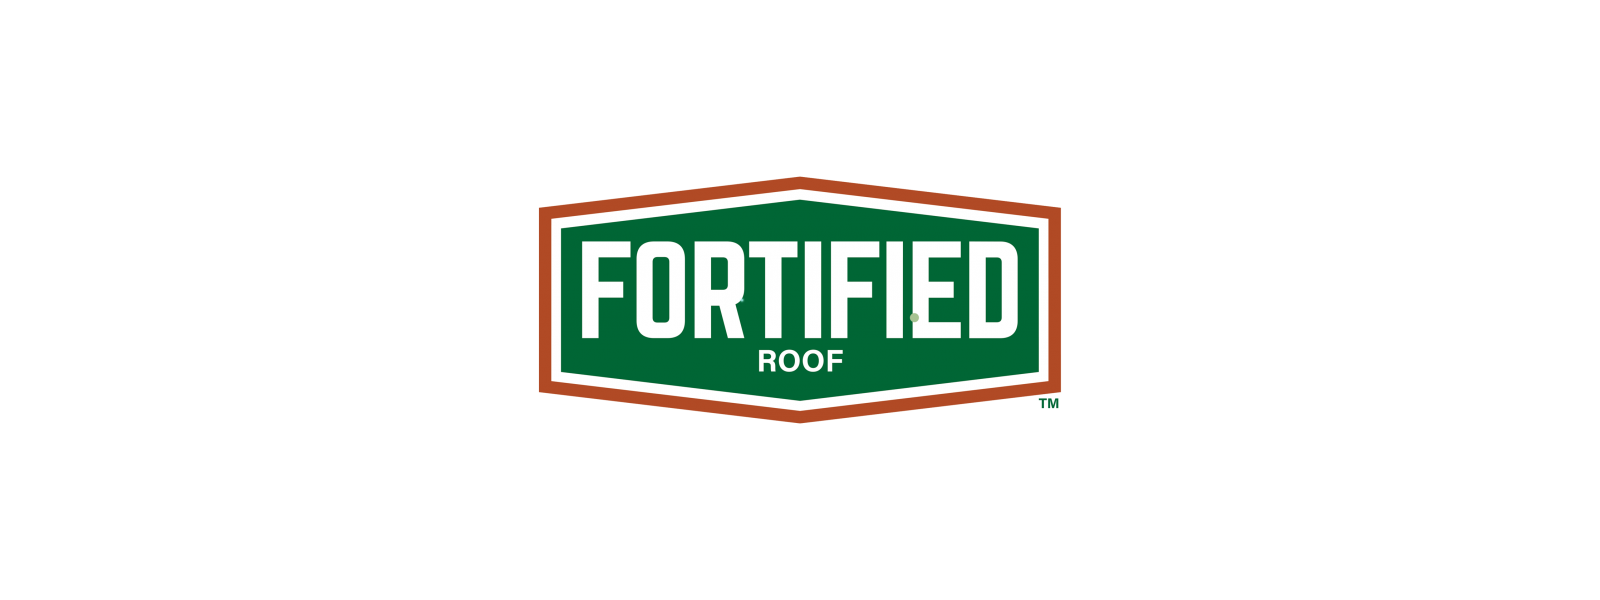 Fortified  for Halo Roofing & Renovations in Benson, NC